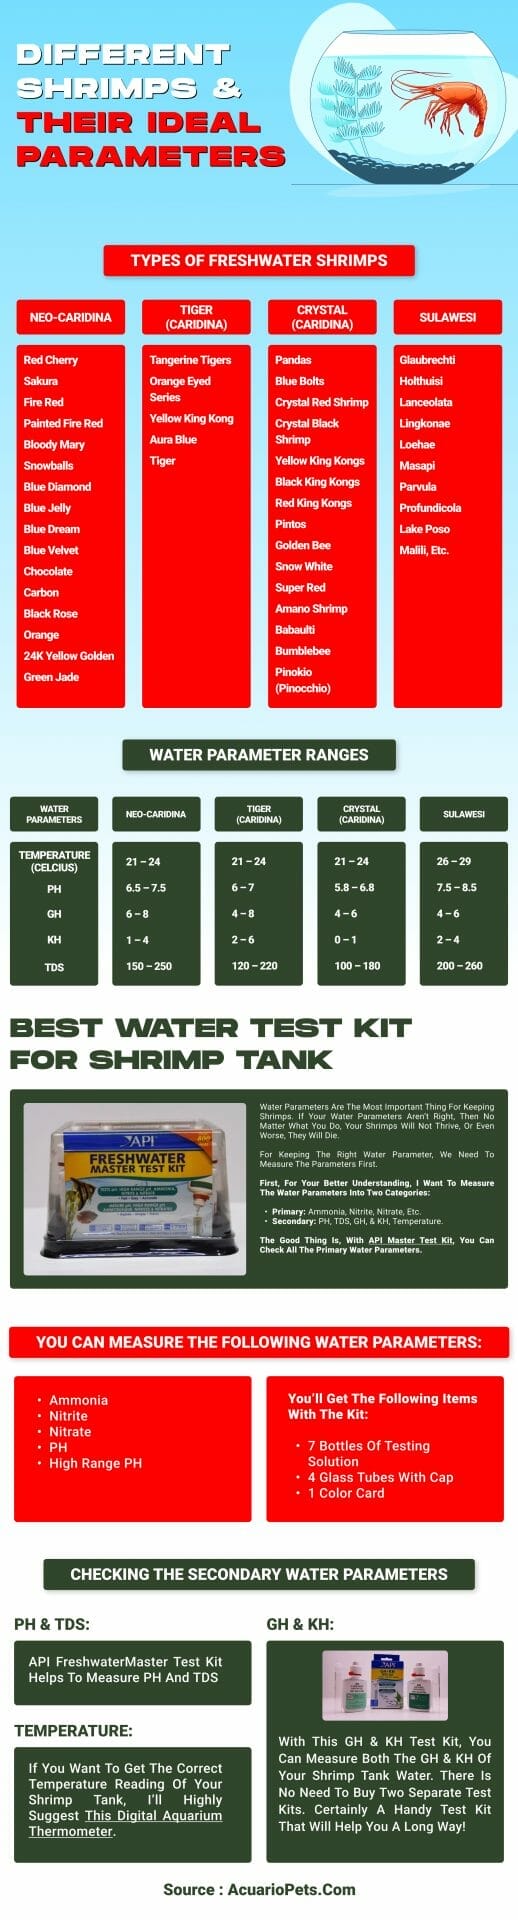 different shrimps' ideal water parameters infographic